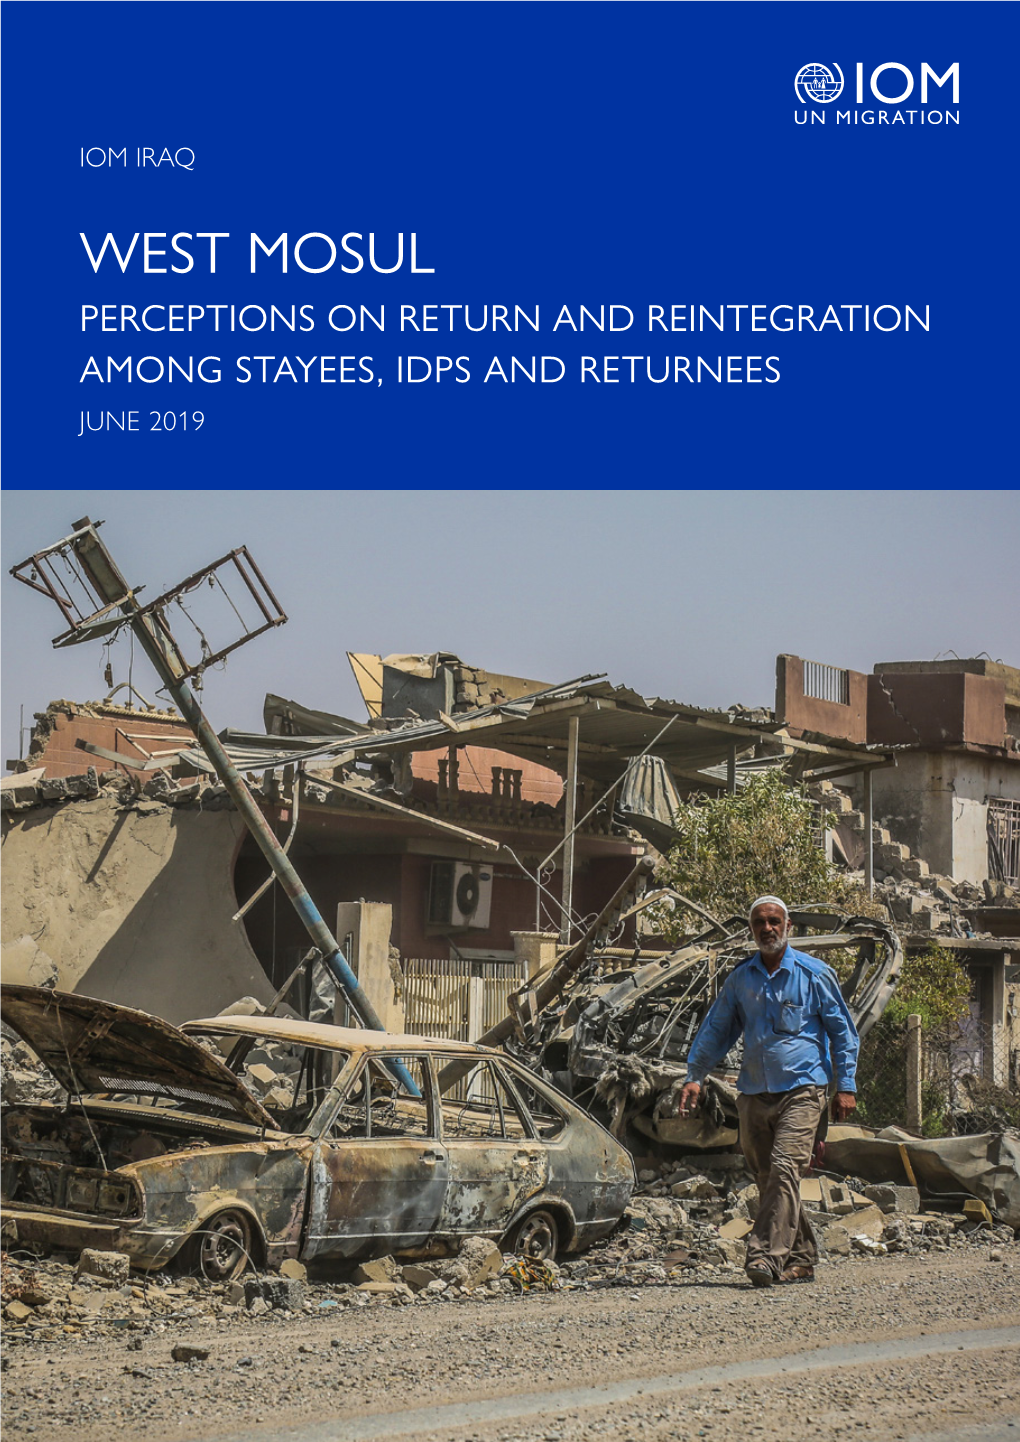 West Mosul: Perceptions on Return and Reintegration Among Stayees, Idps and Returnees